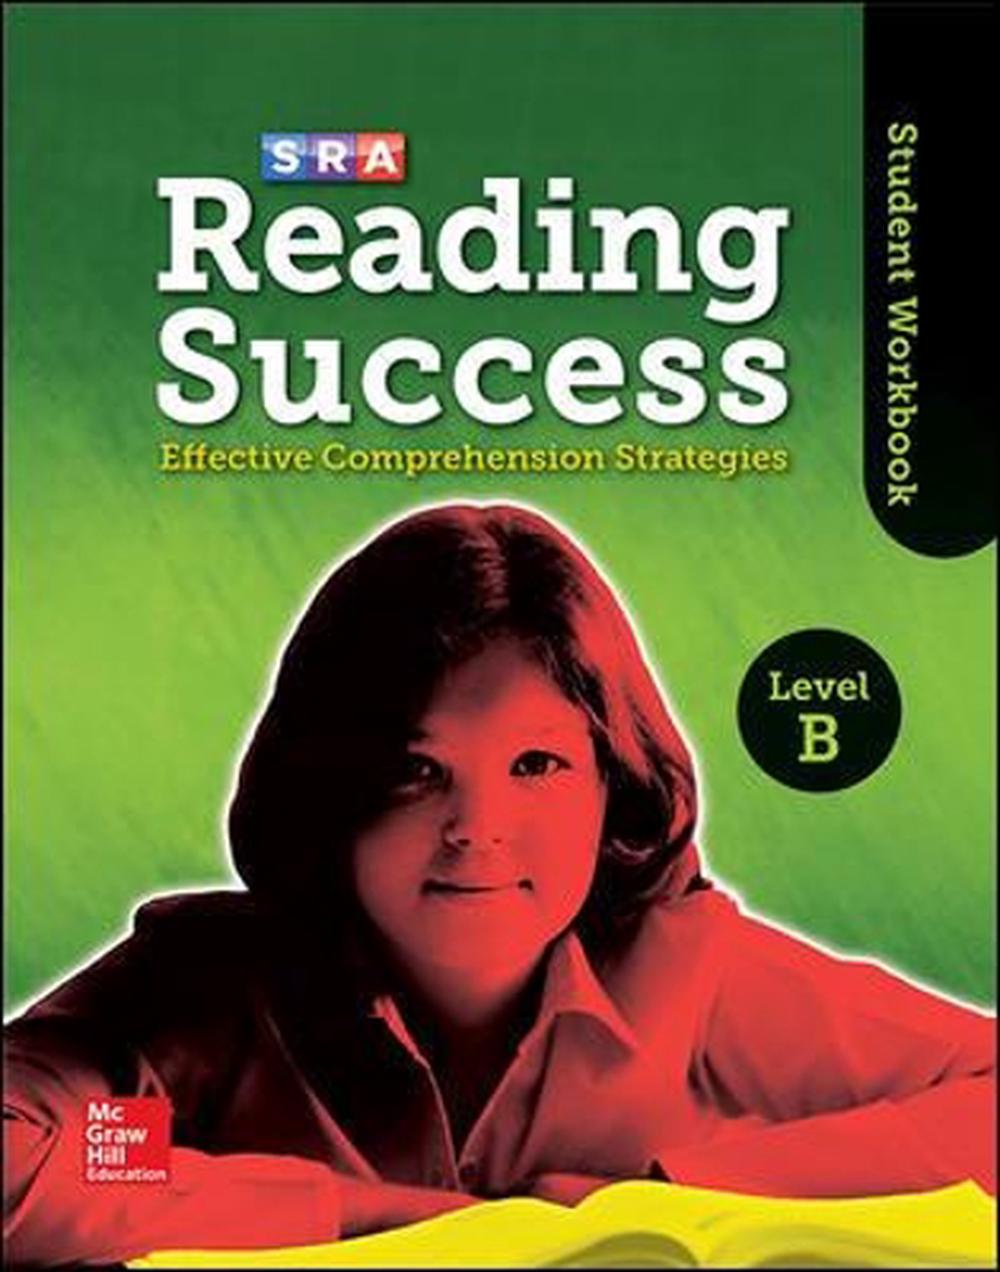 Success　B,　by　The　Paperback,　Buy　at　online　Student　9780076184828　Level　Mcgraw-Hill,　Workbook　Reading　Nile